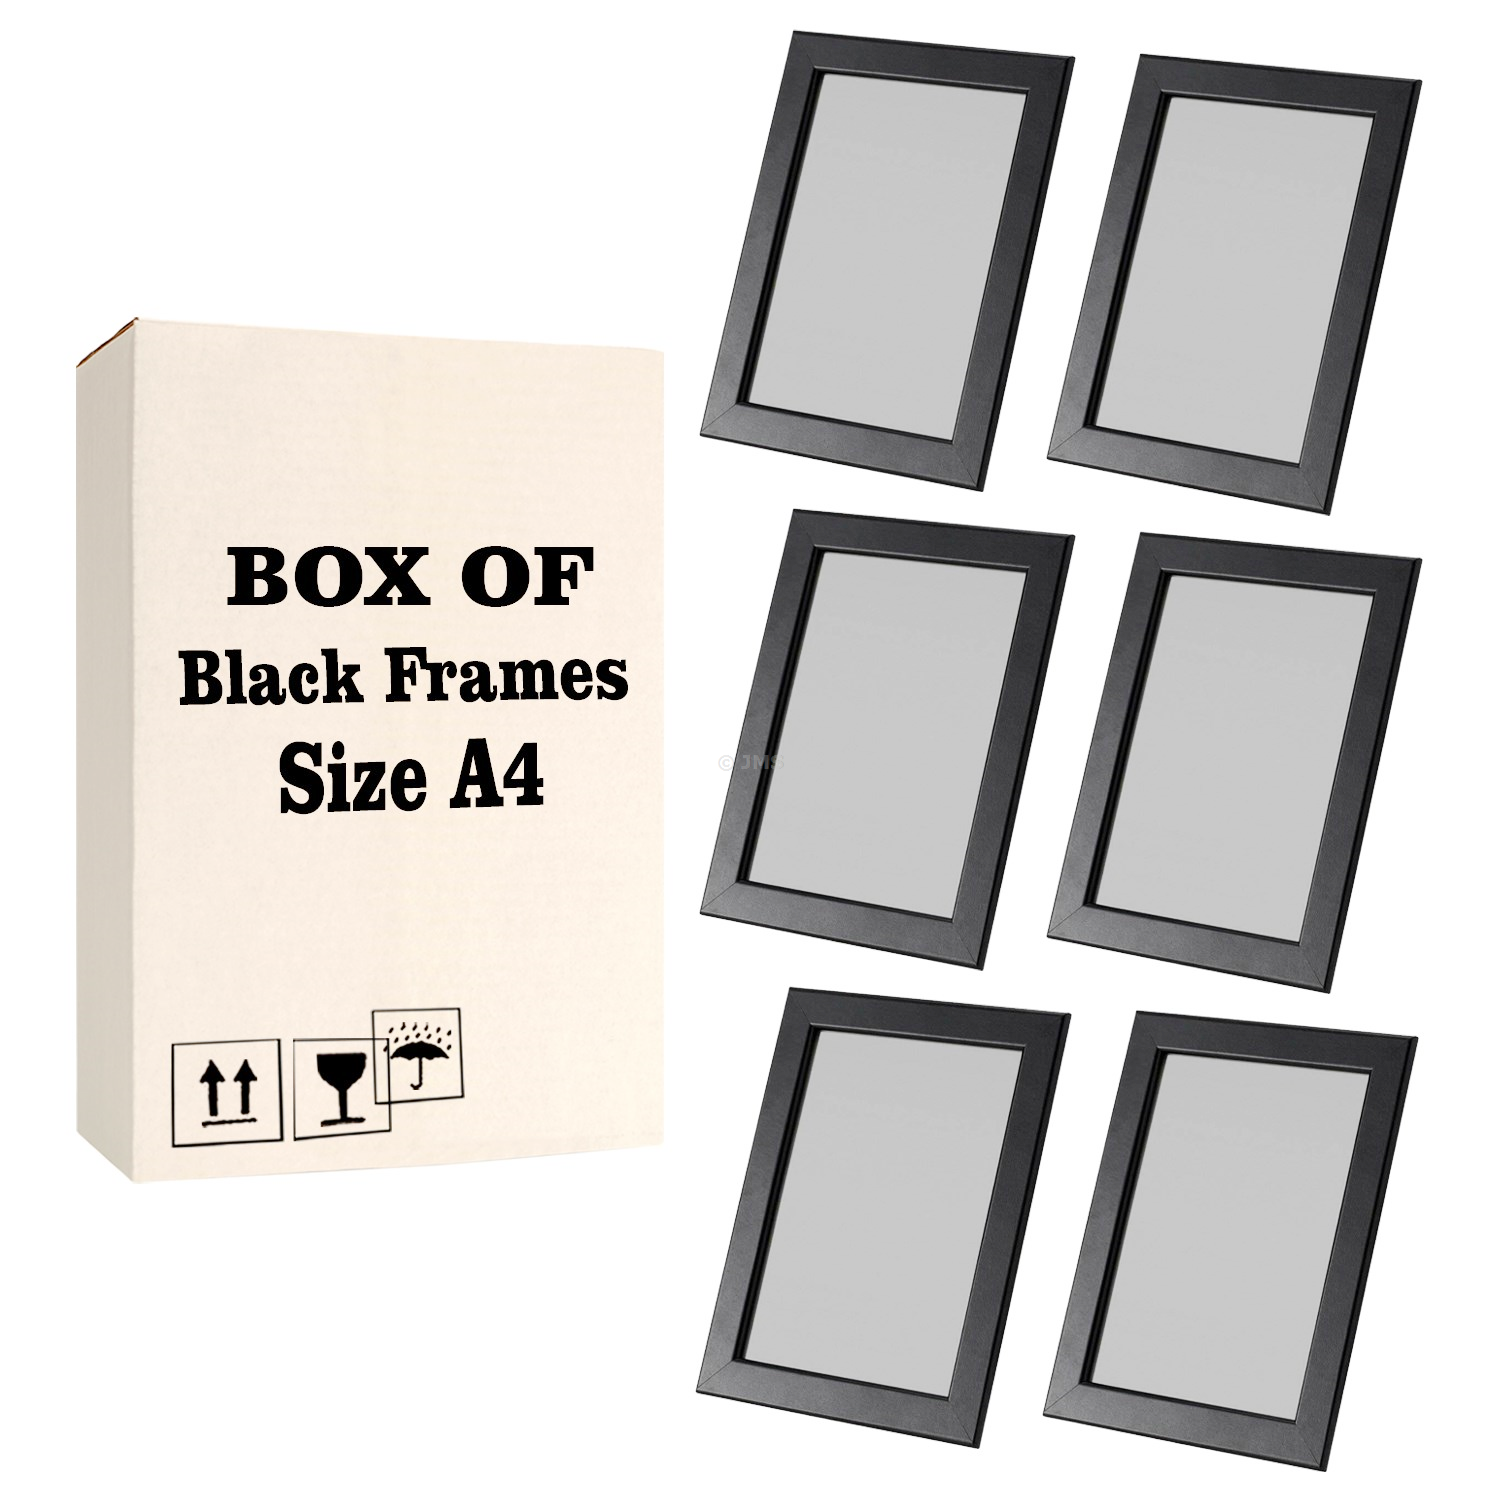 [Set of 24] Black Styrene Photo Picture Frame A4 (21 x 29.7cm) Certificate Frames Wall Mountable Poster Art